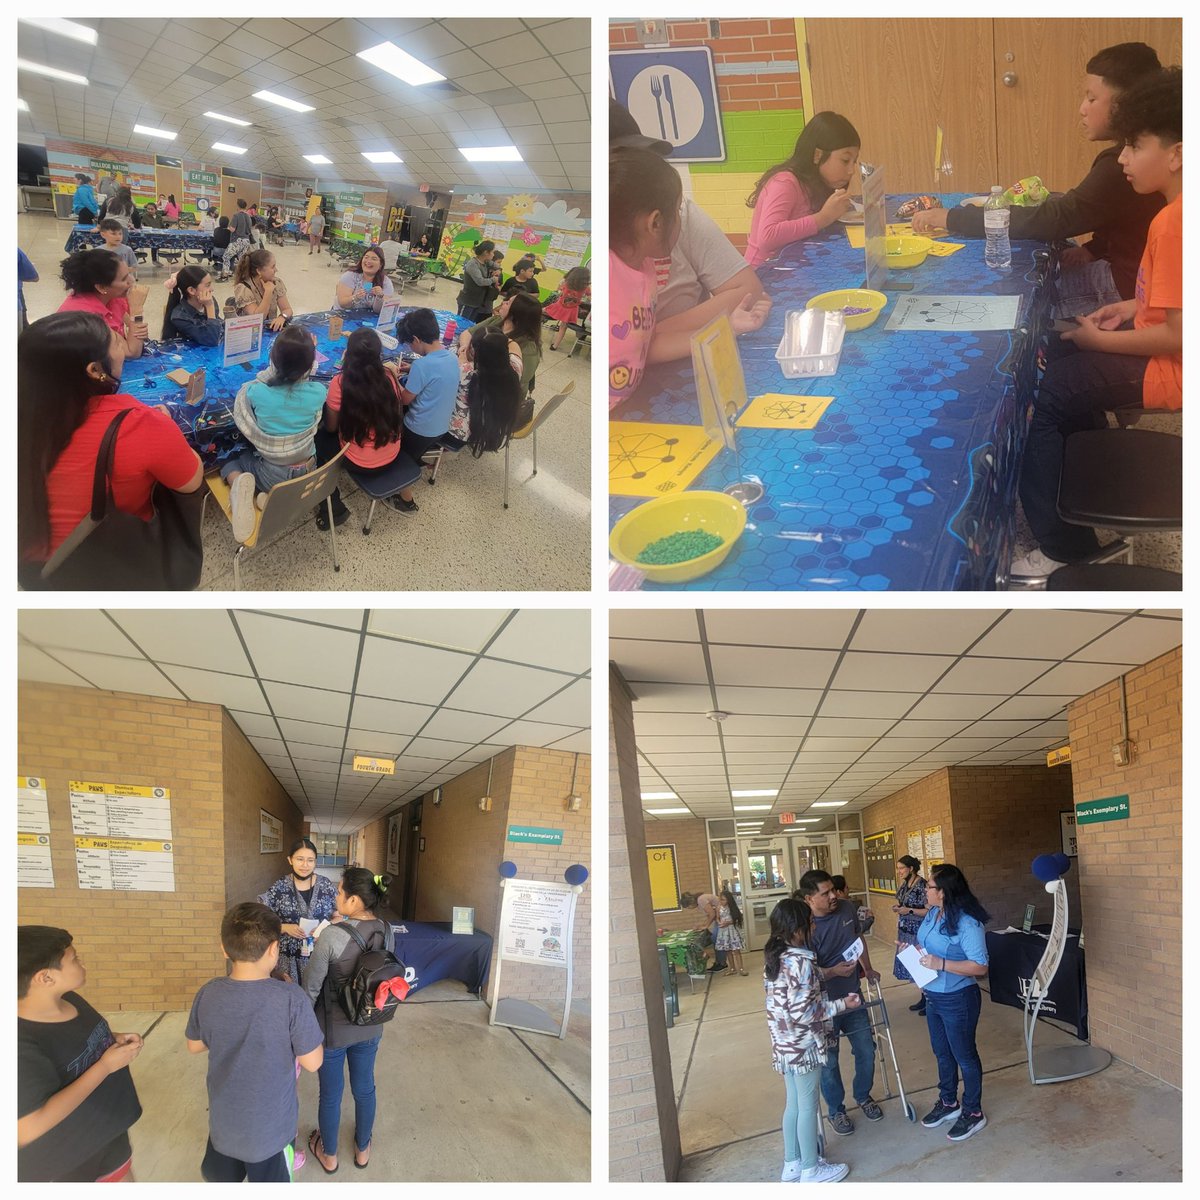 Great turnout tonight for Family Math Night @BlackES_AISD ! @A_Hart73 @JEANNICOLE06